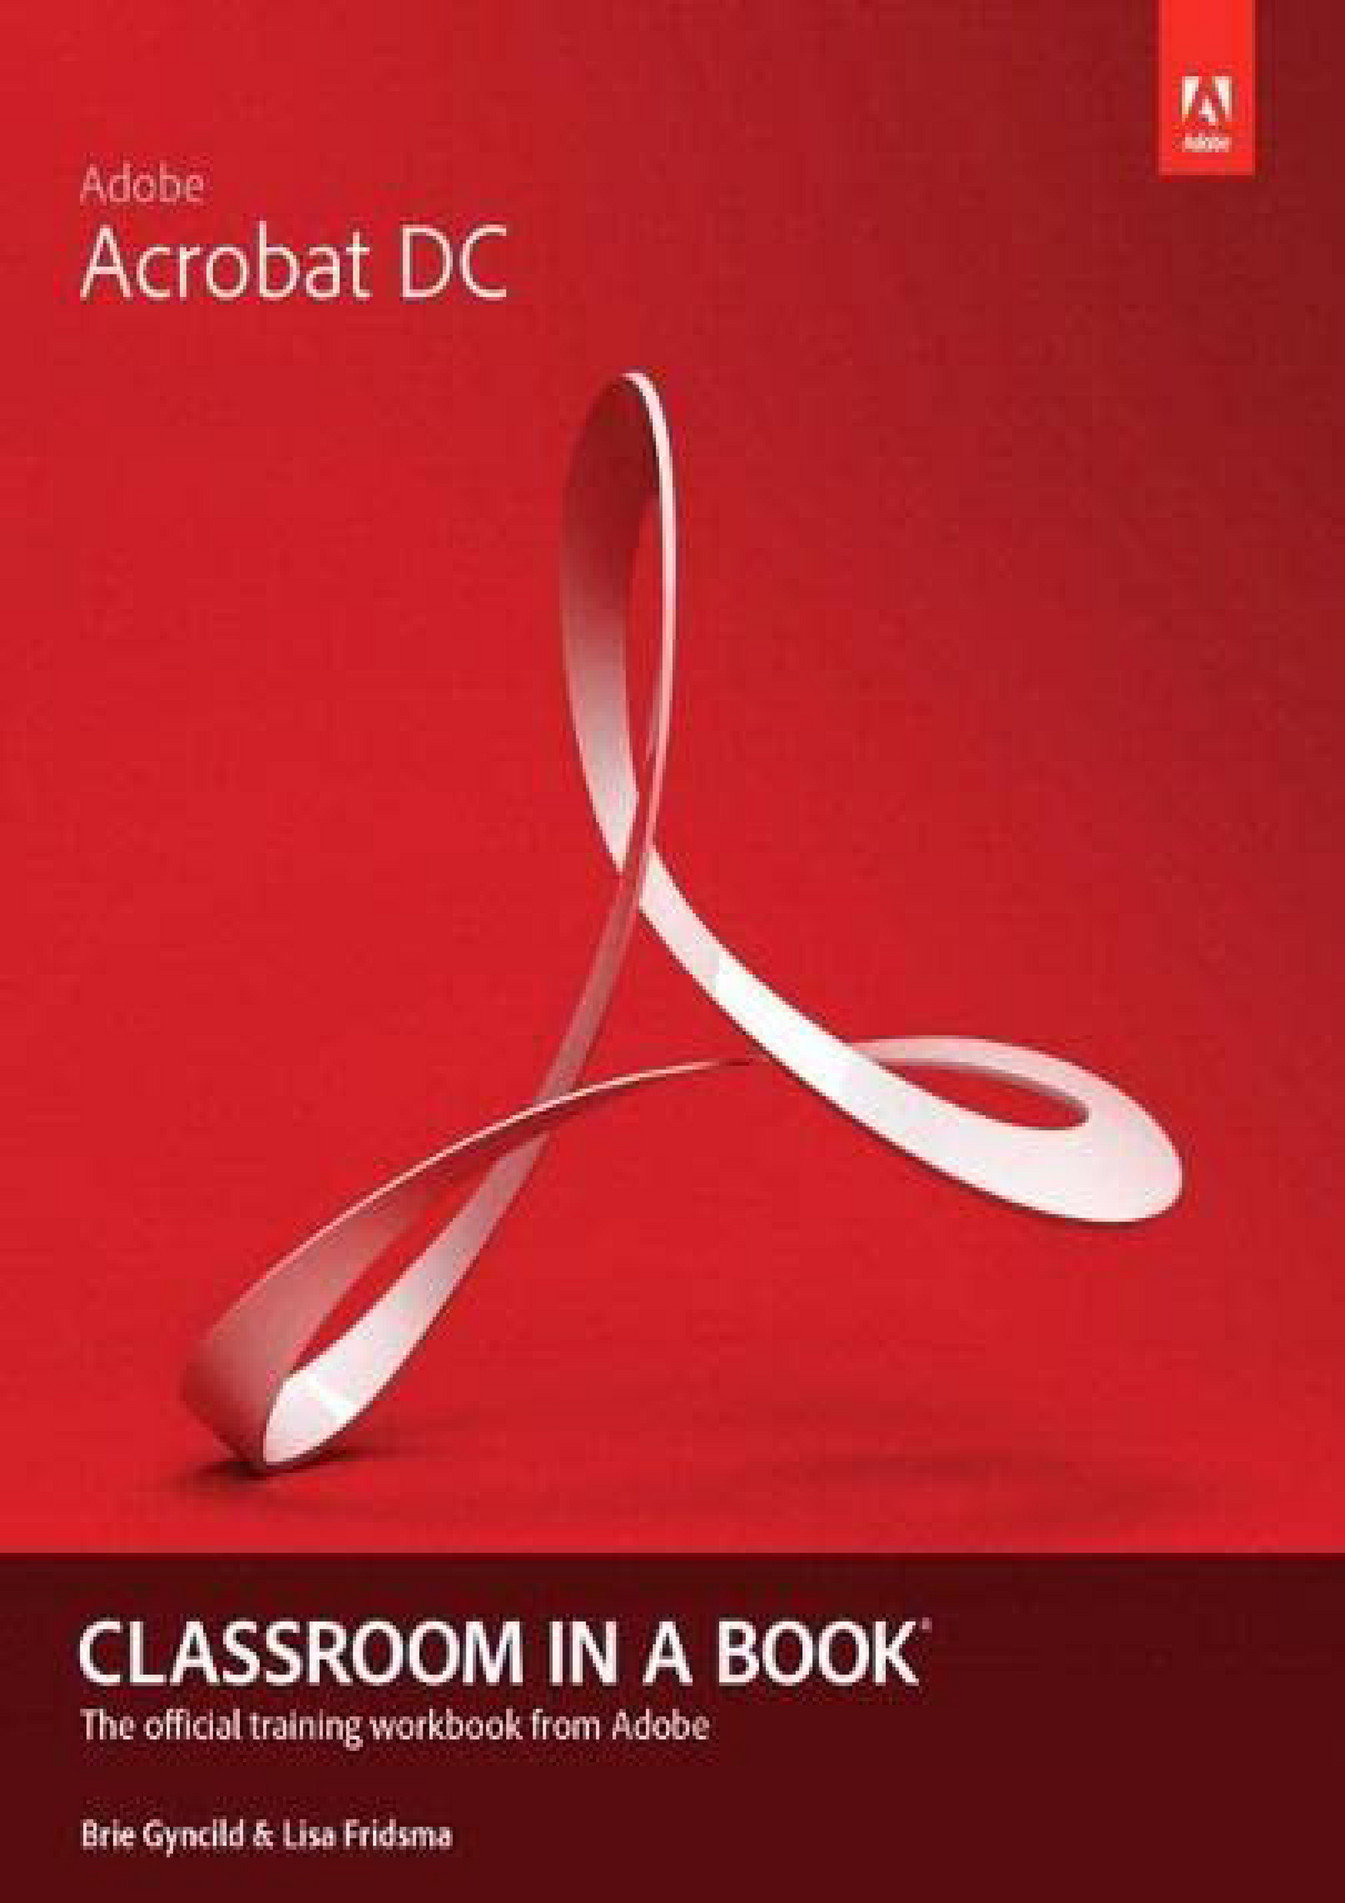 adobe acrobat dc classroom in a book free download